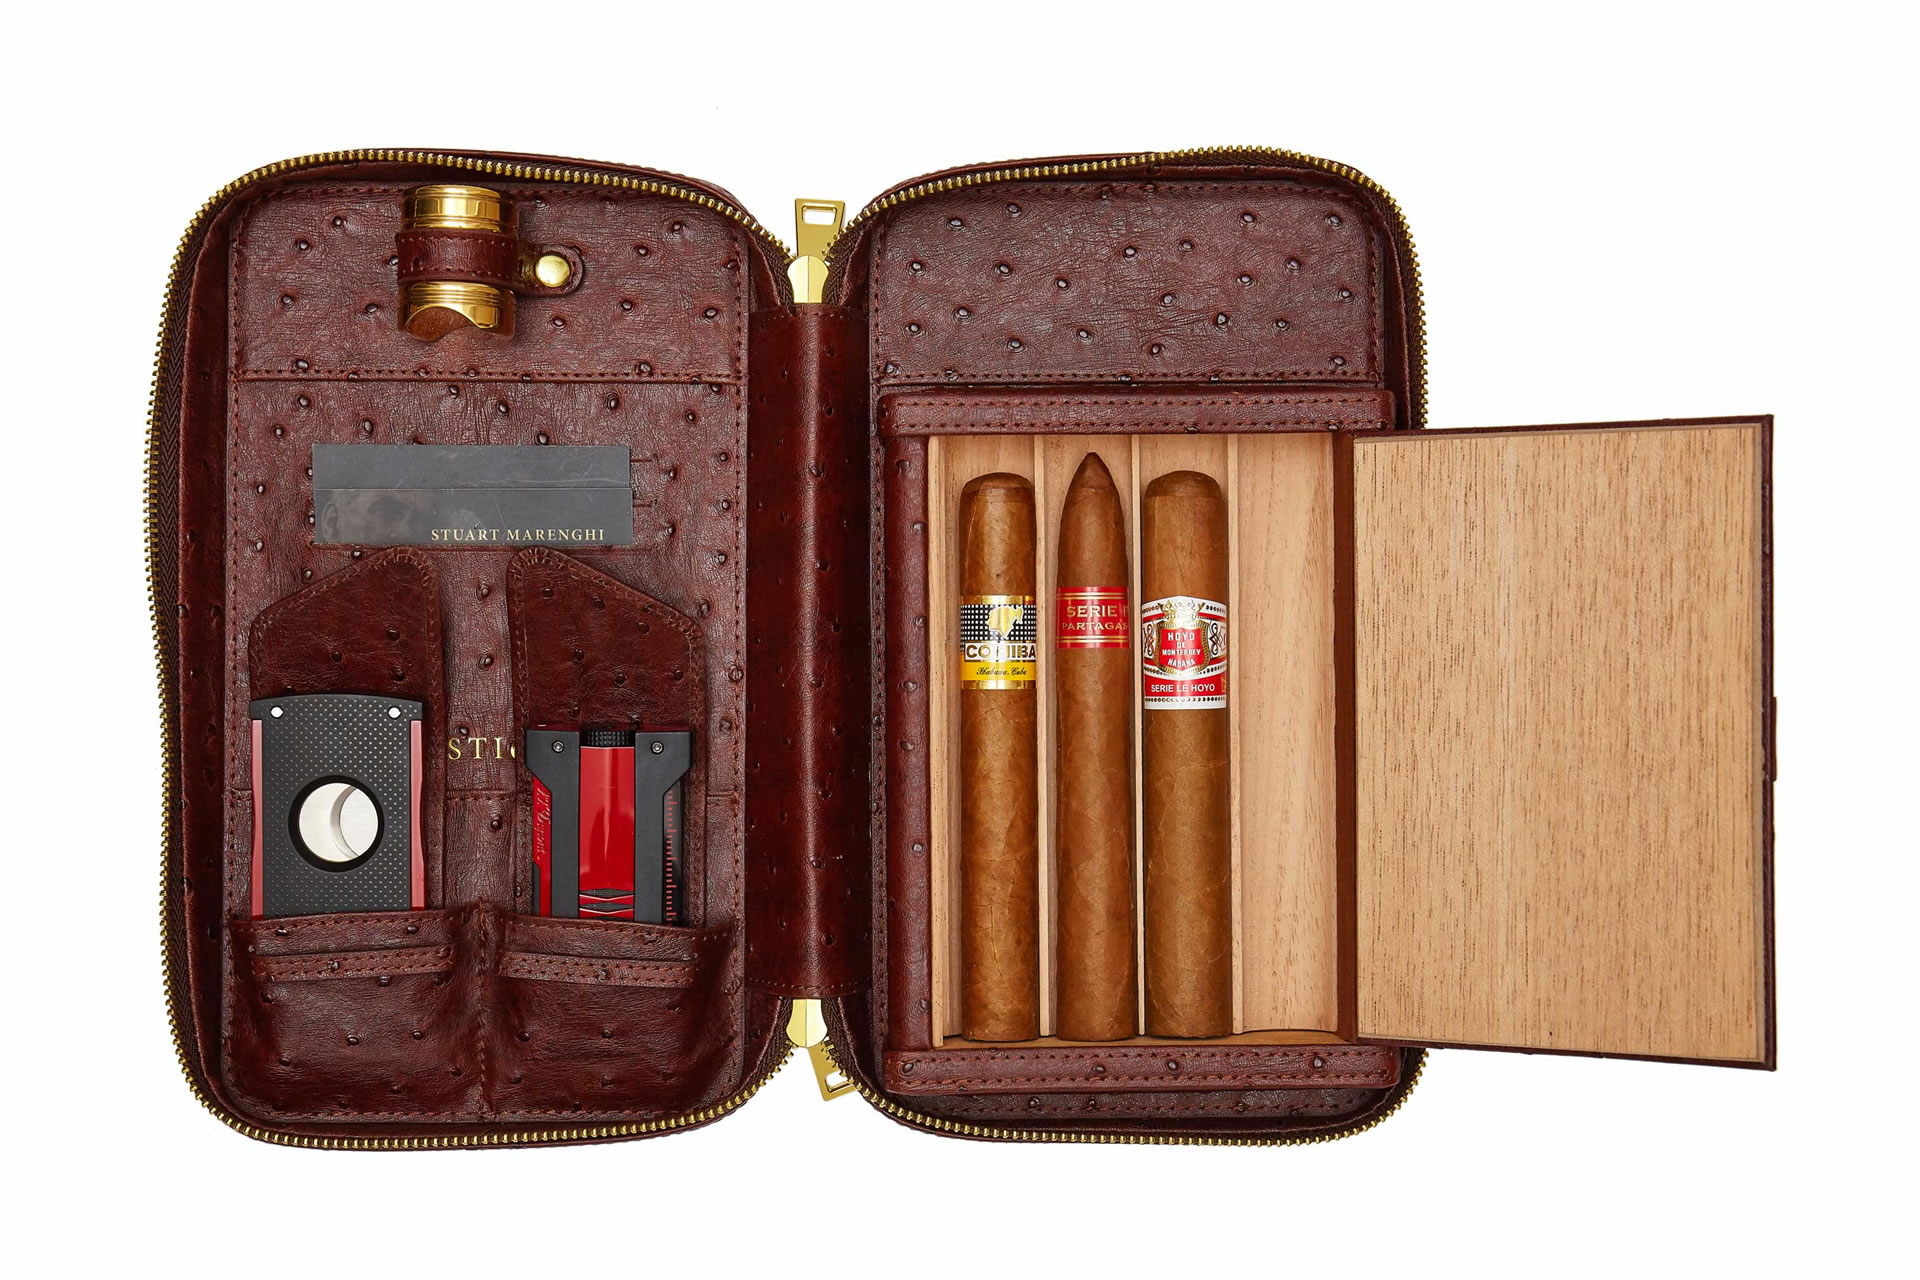 2 cigar leather travel case